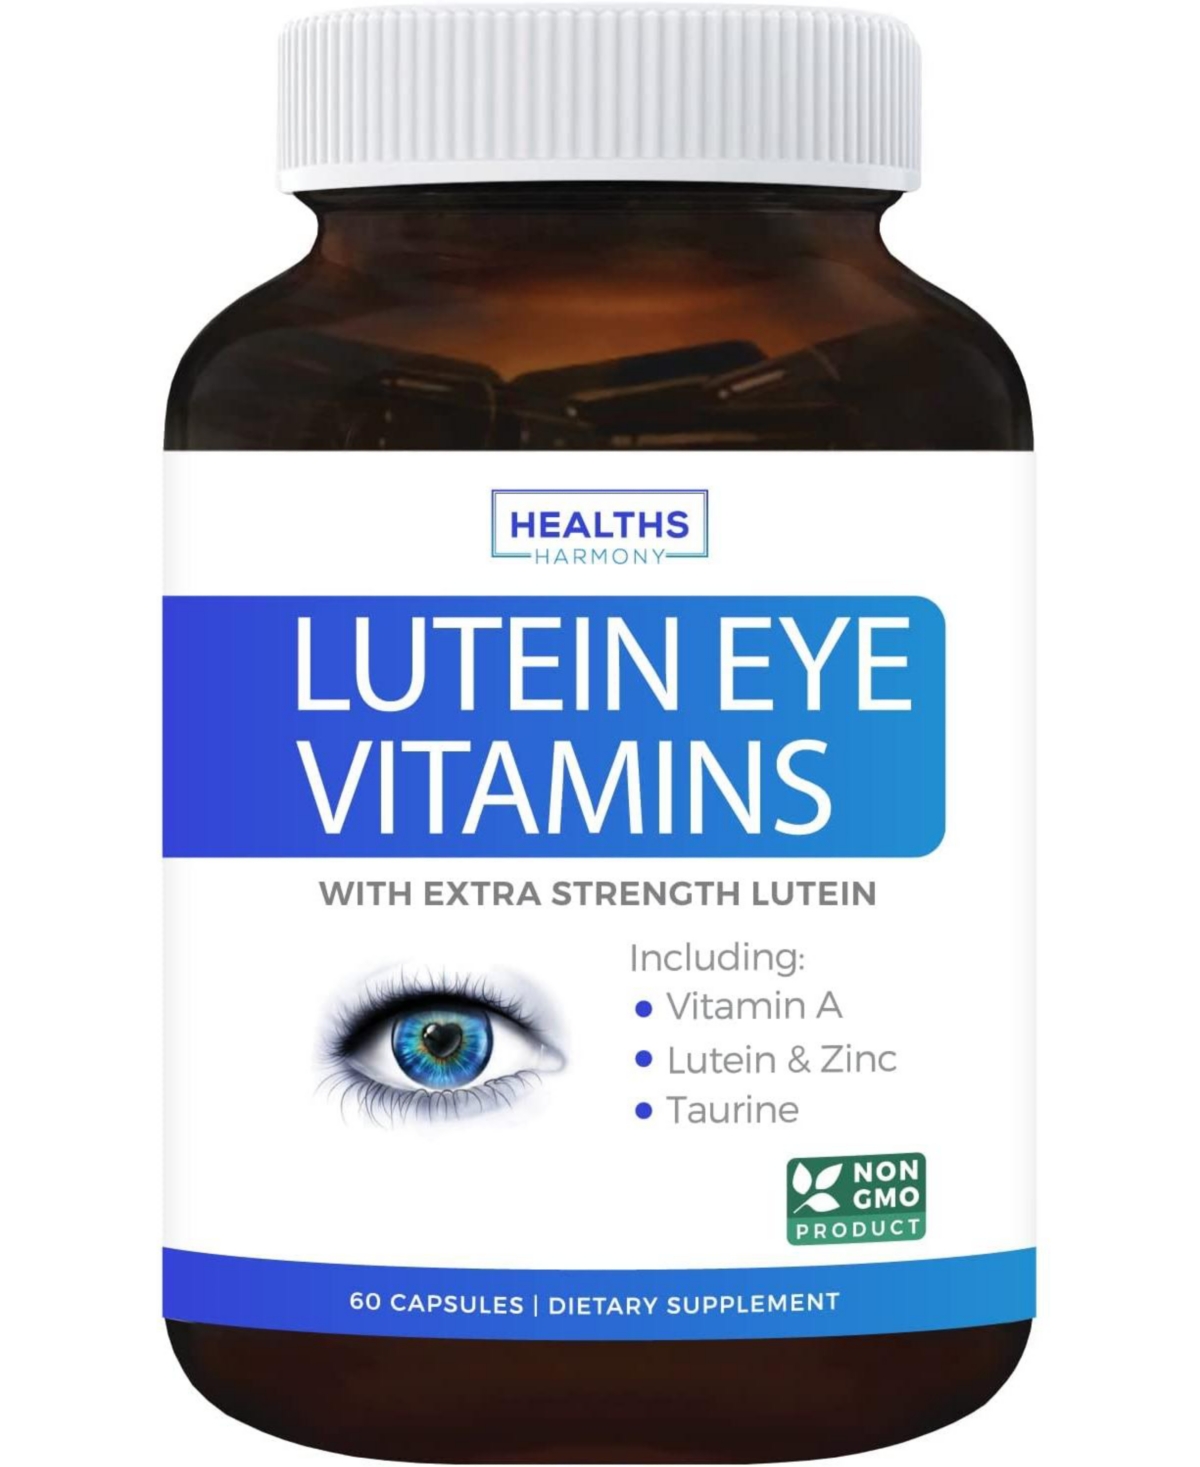 Lutein Eye Vitamins (Non-gmo) Vision Support Supplement for Tired and Dry Eyes - Maintain Vision Health With Zinc & Powerful Bilberry, Milk Thistle, G